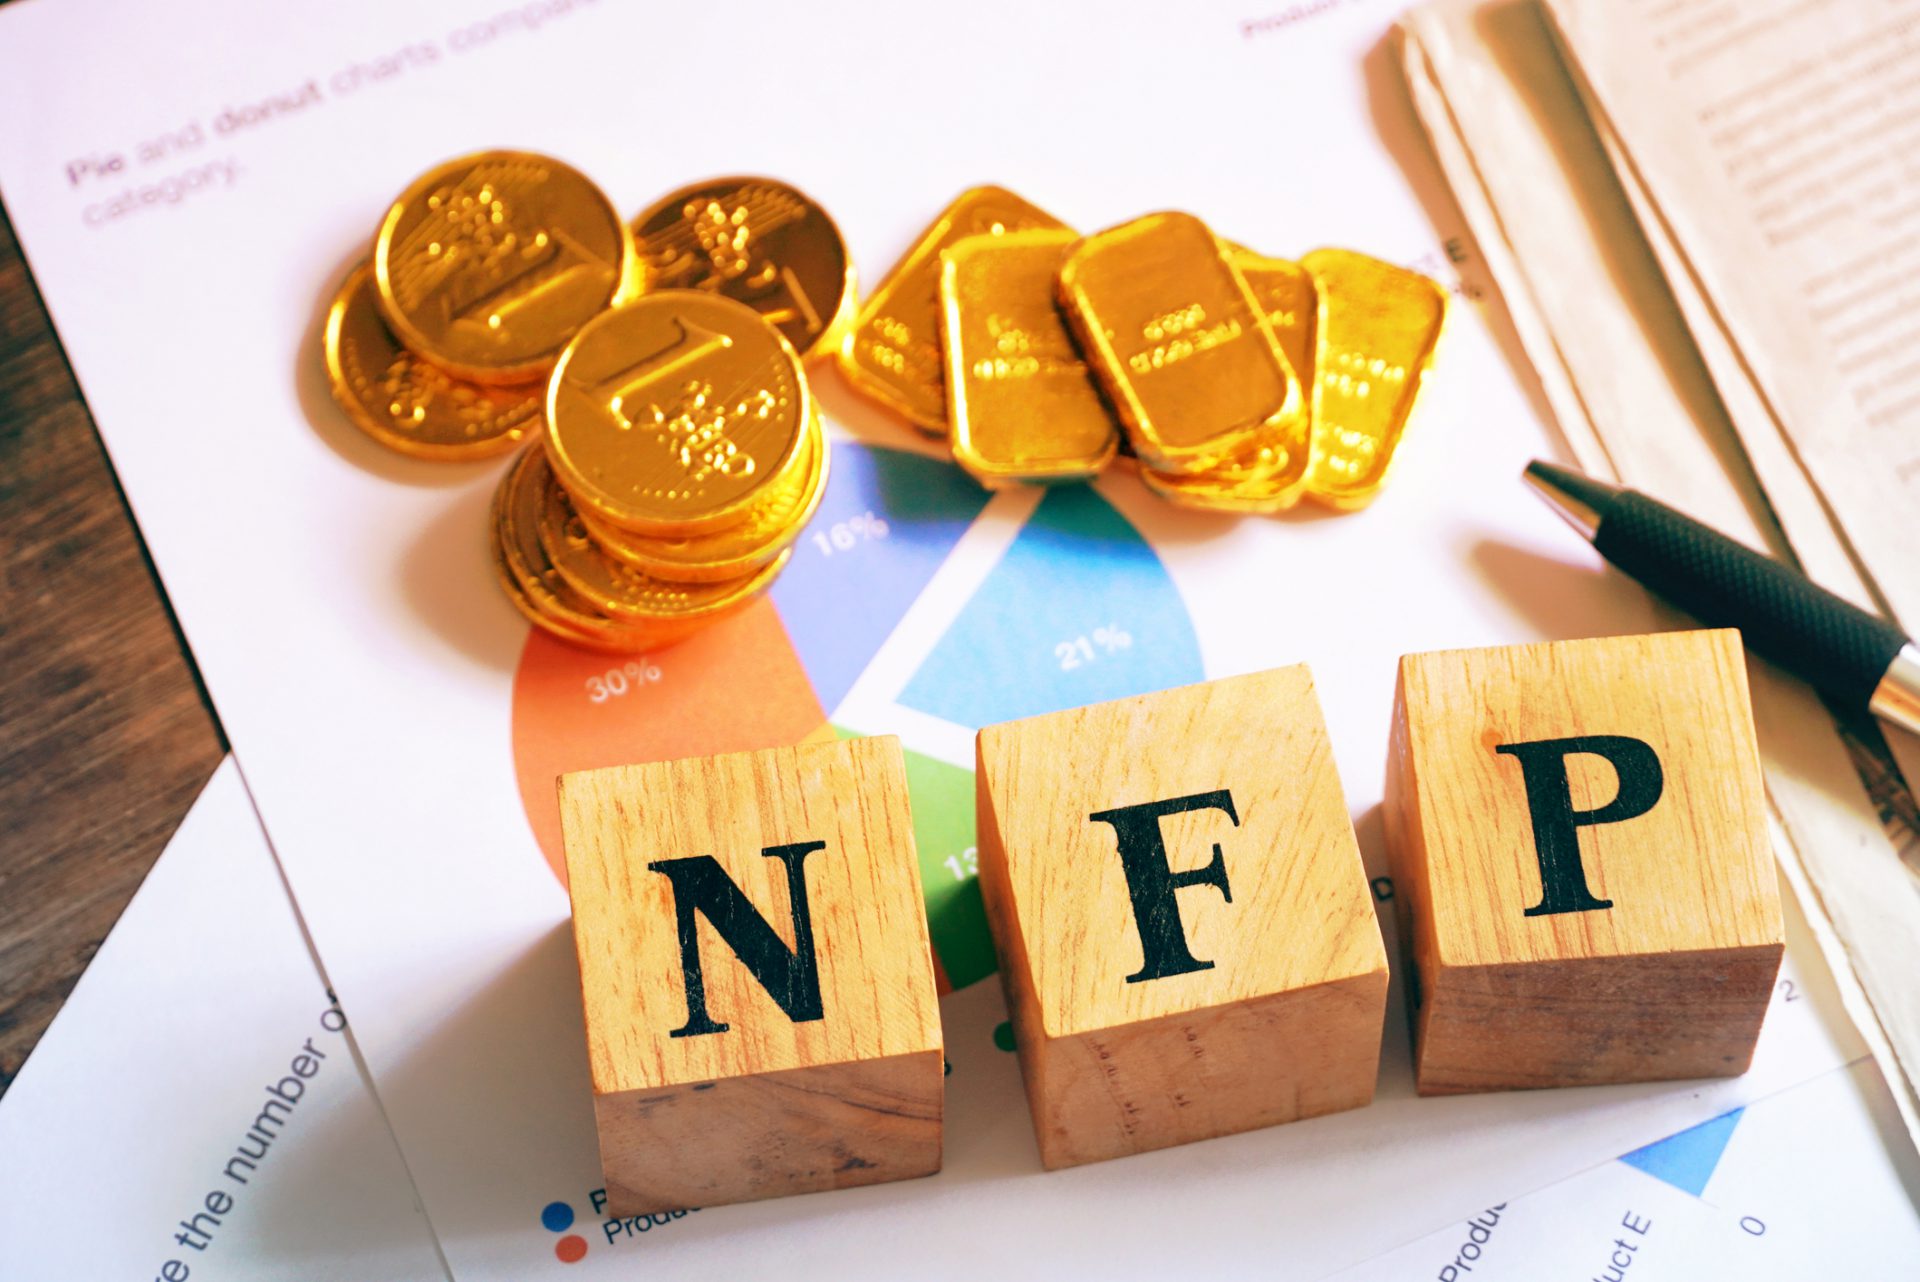 Text "NFP" on wood cube with gold bar and newspaper on the table, economic data concept